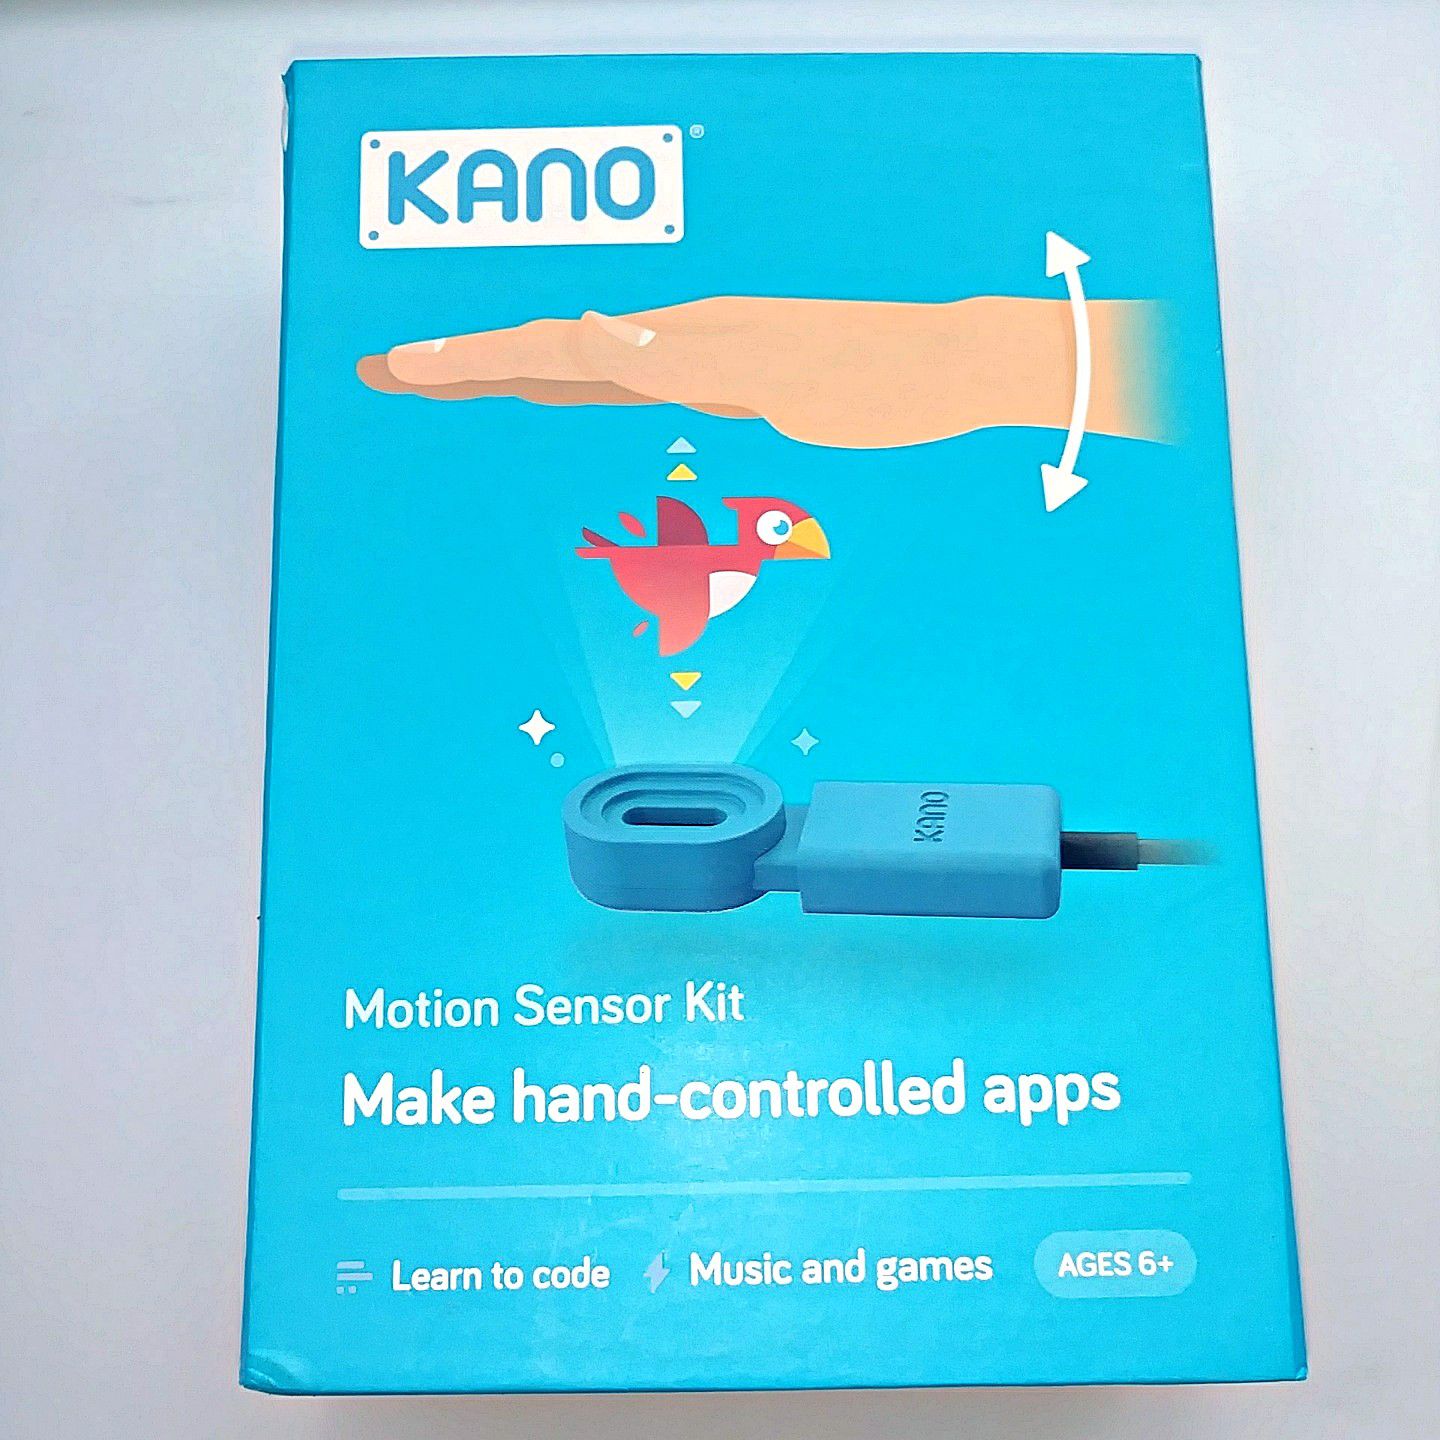 Kano Motion Sensor Kit: Make Hand-Controlled Apps / Learn to Code